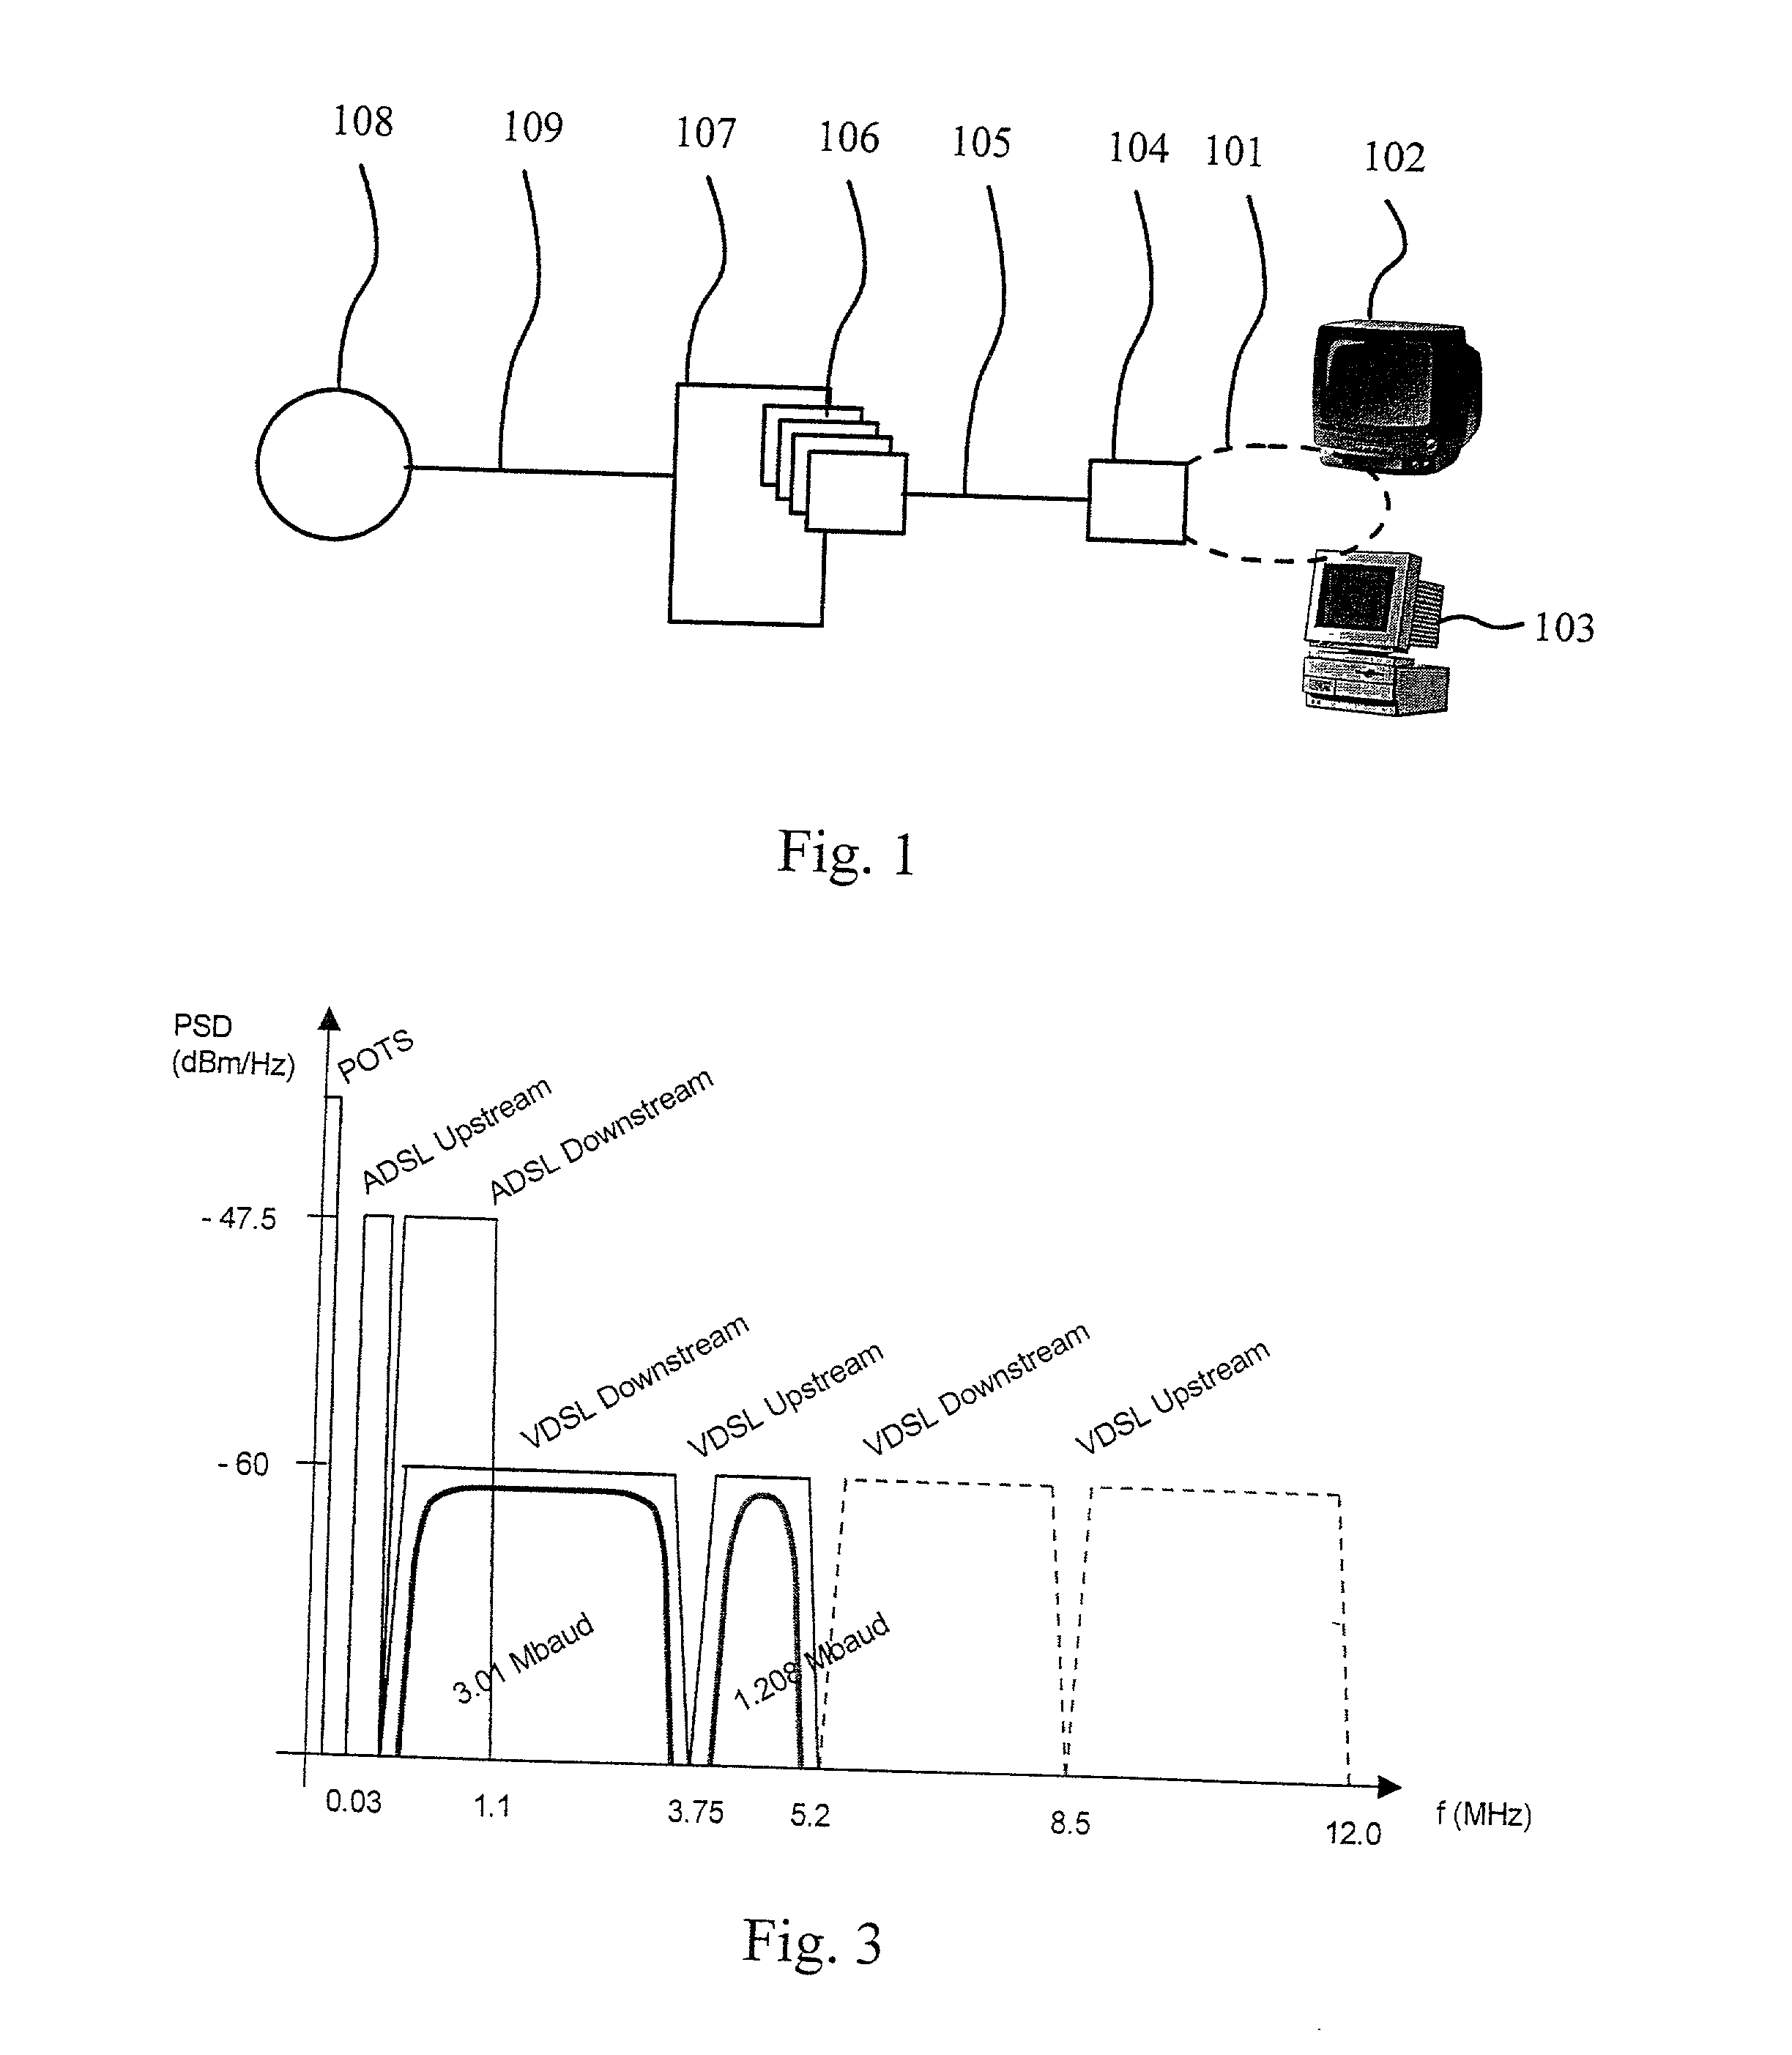 Method and apparatus for adjusting digital filters in a DSL modem